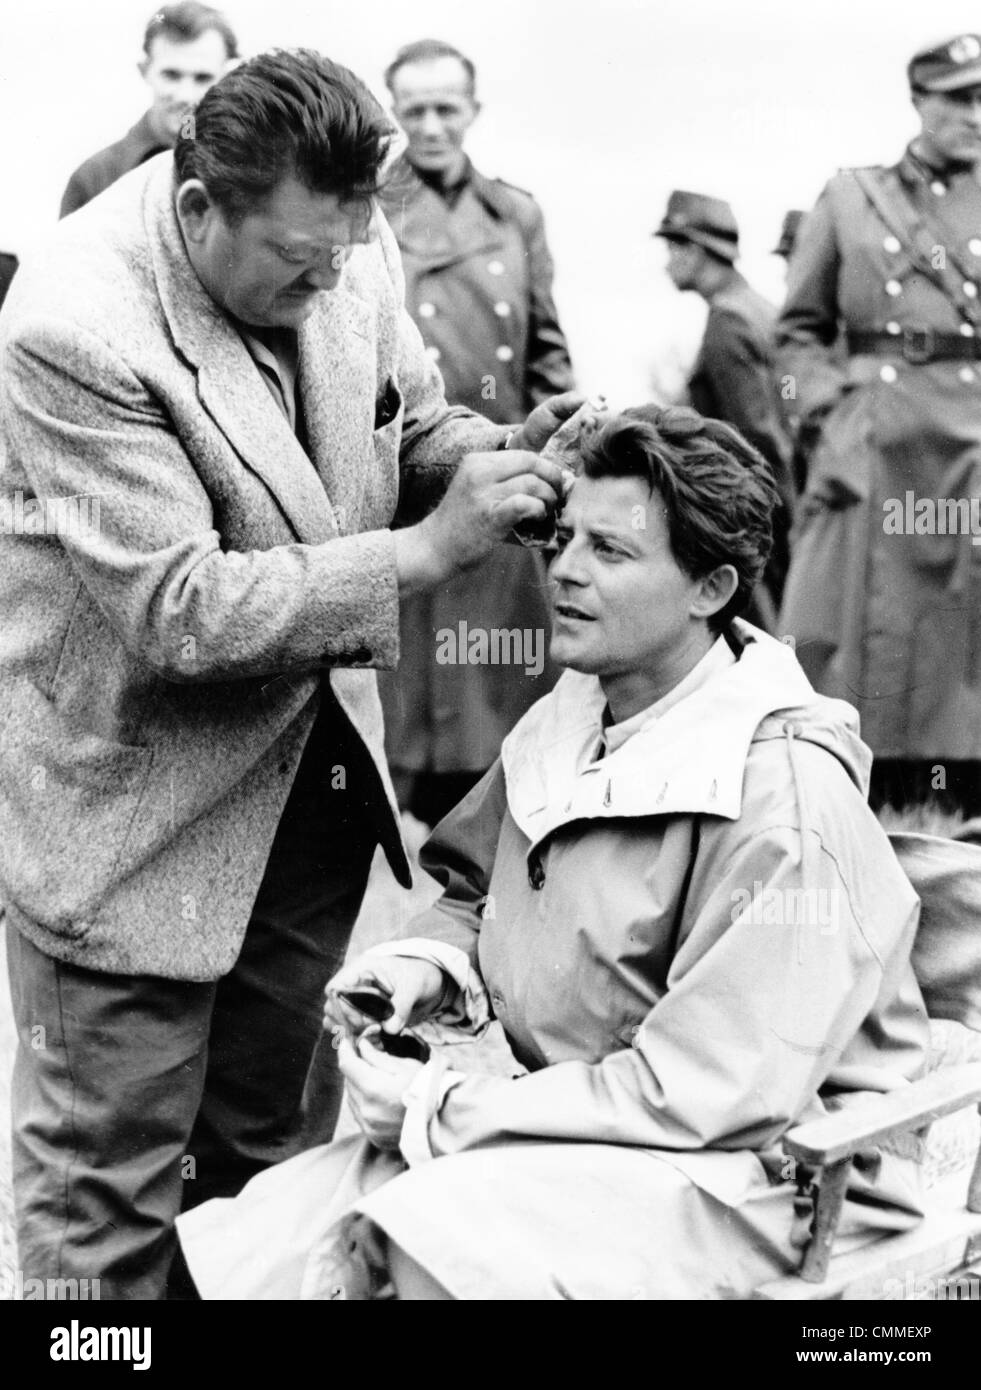 French actor Gerard Philipe is made up during the shooting of the film (literally) 'The adventures of Till Ulenspiegel' in Raguhn, GDR, 1956. In the joint East-German-French production of DEFA (East Germany) and Les Films Ariane (France), Philipe played the main characters and directed the movie which was his only directing job of his career. Photo: Hanns-Peter Beyer - ATTENTION! NO WIRE SERVICE Stock Photo